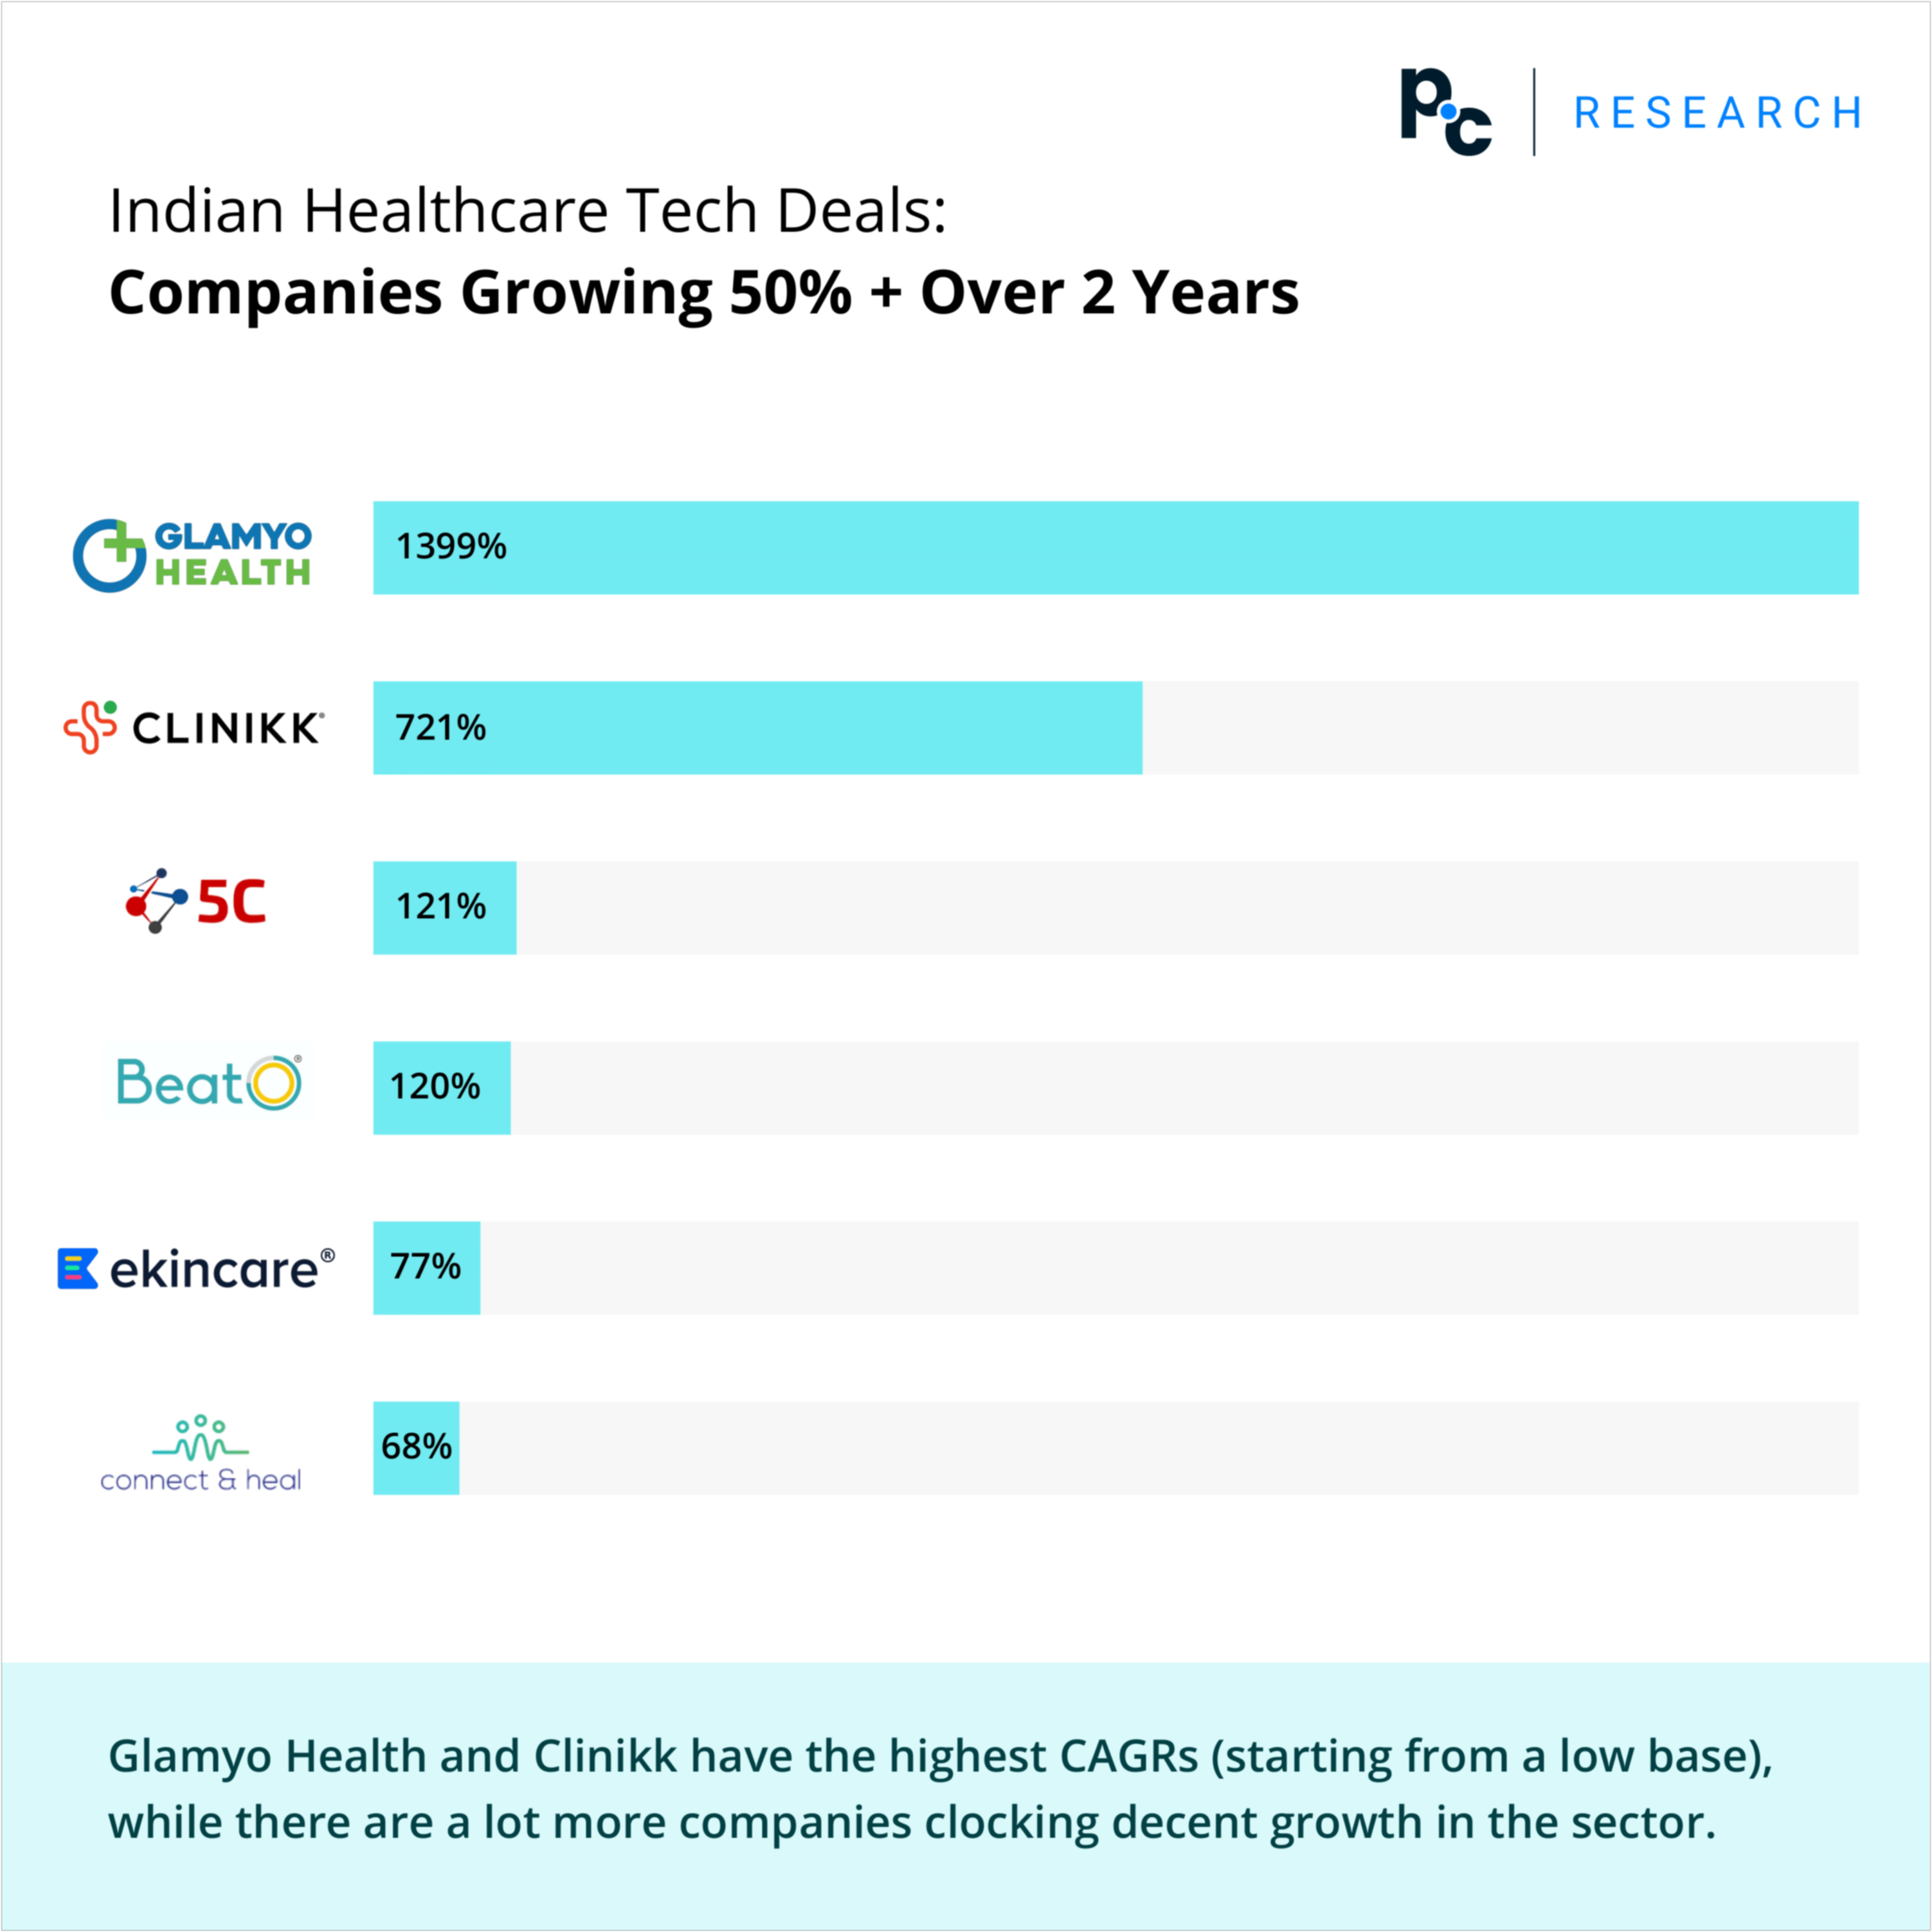 Indian Healthcare Tech Deals: Companies Growing 50% + Over 2 Years.

Glamyo Health and Clinikk have the highest CAGRs (starting from a low base), while there are a lot more companies clocking decent growth in the sector. 
